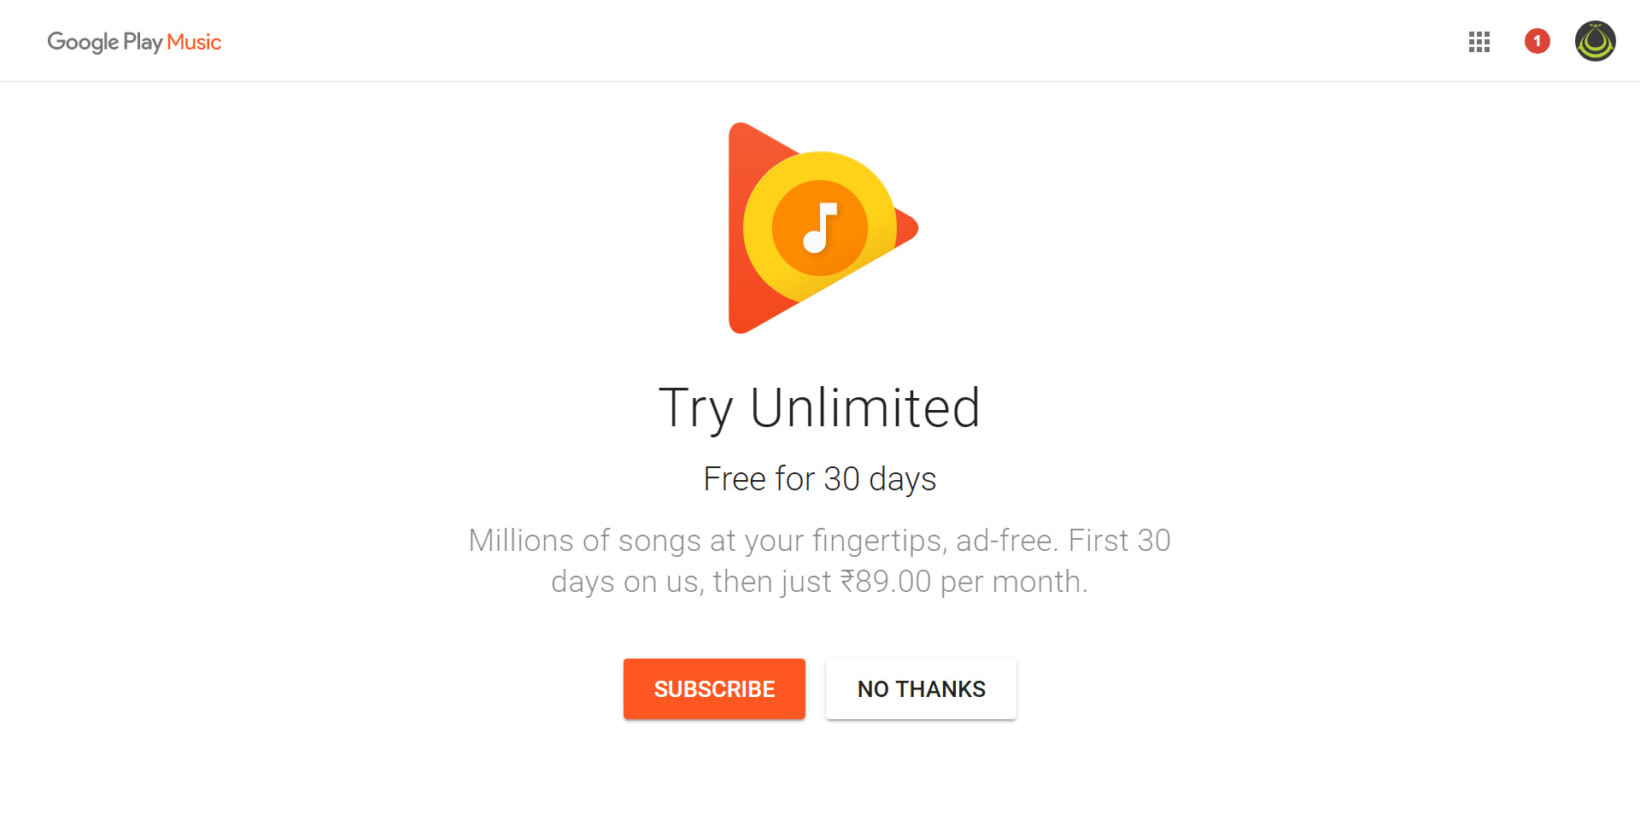 google play music unlimited launches in